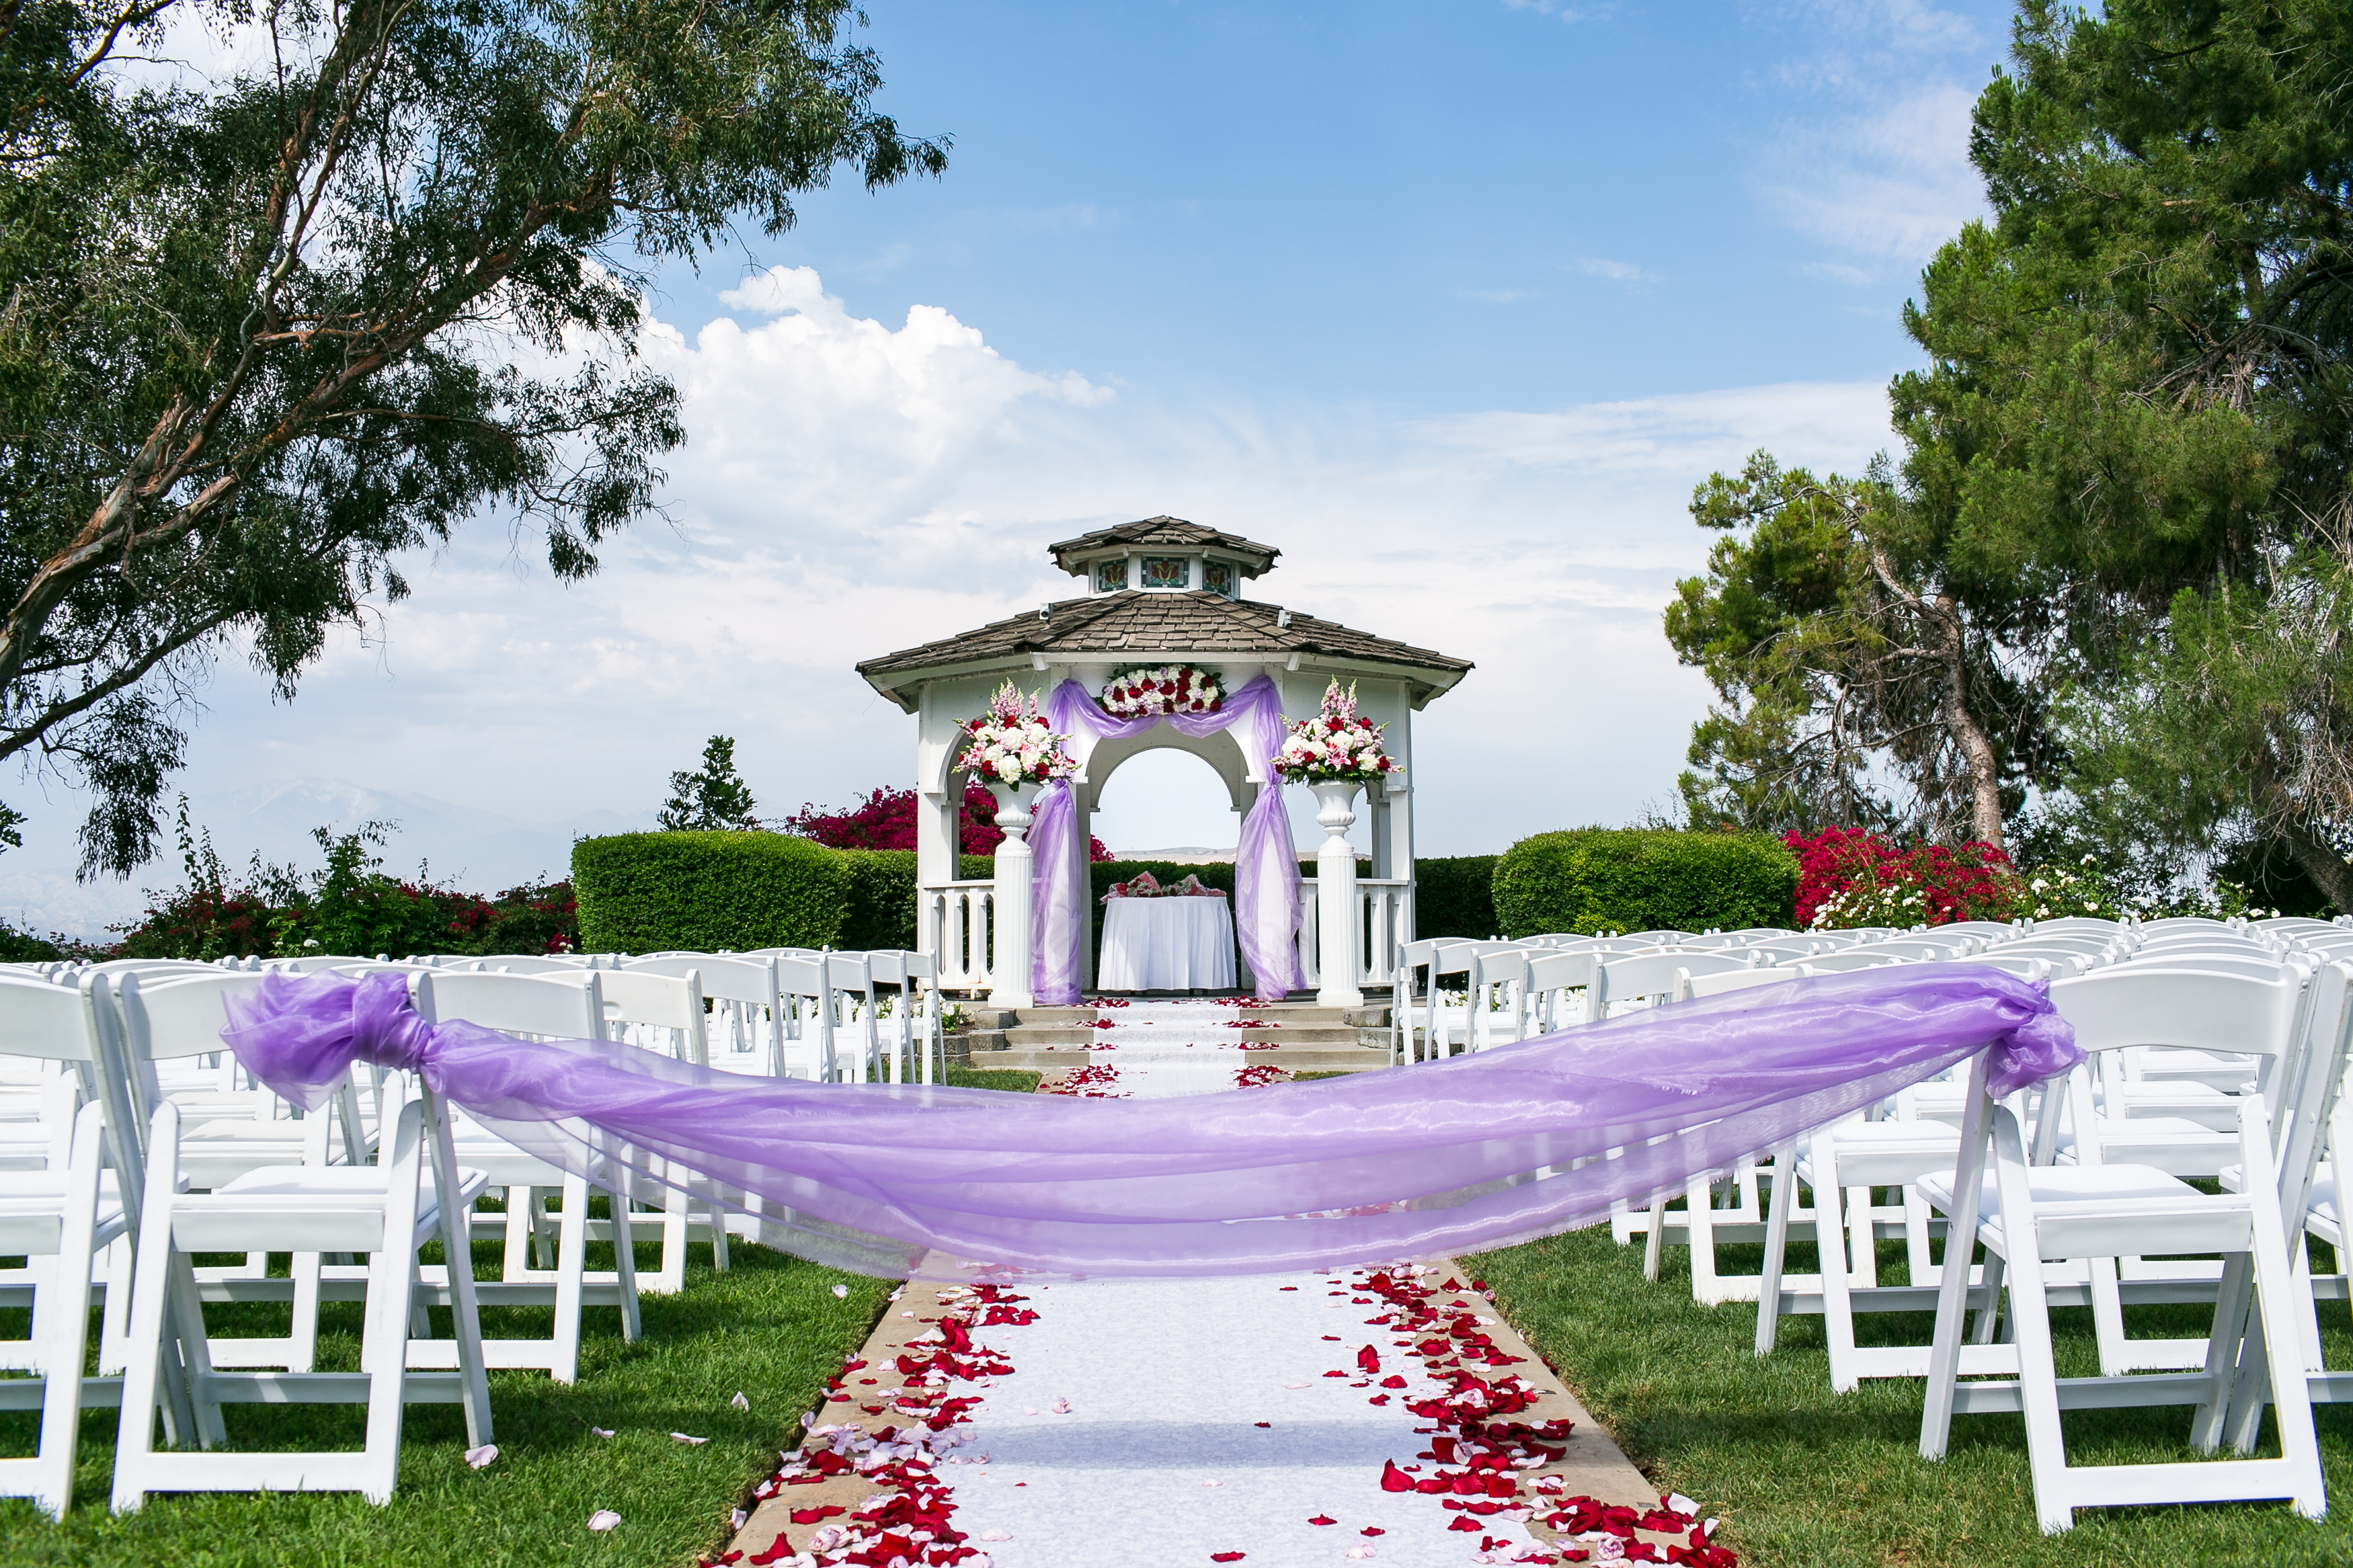 Ceremony aisle leading up to white gazebo with green trees and a blue sky